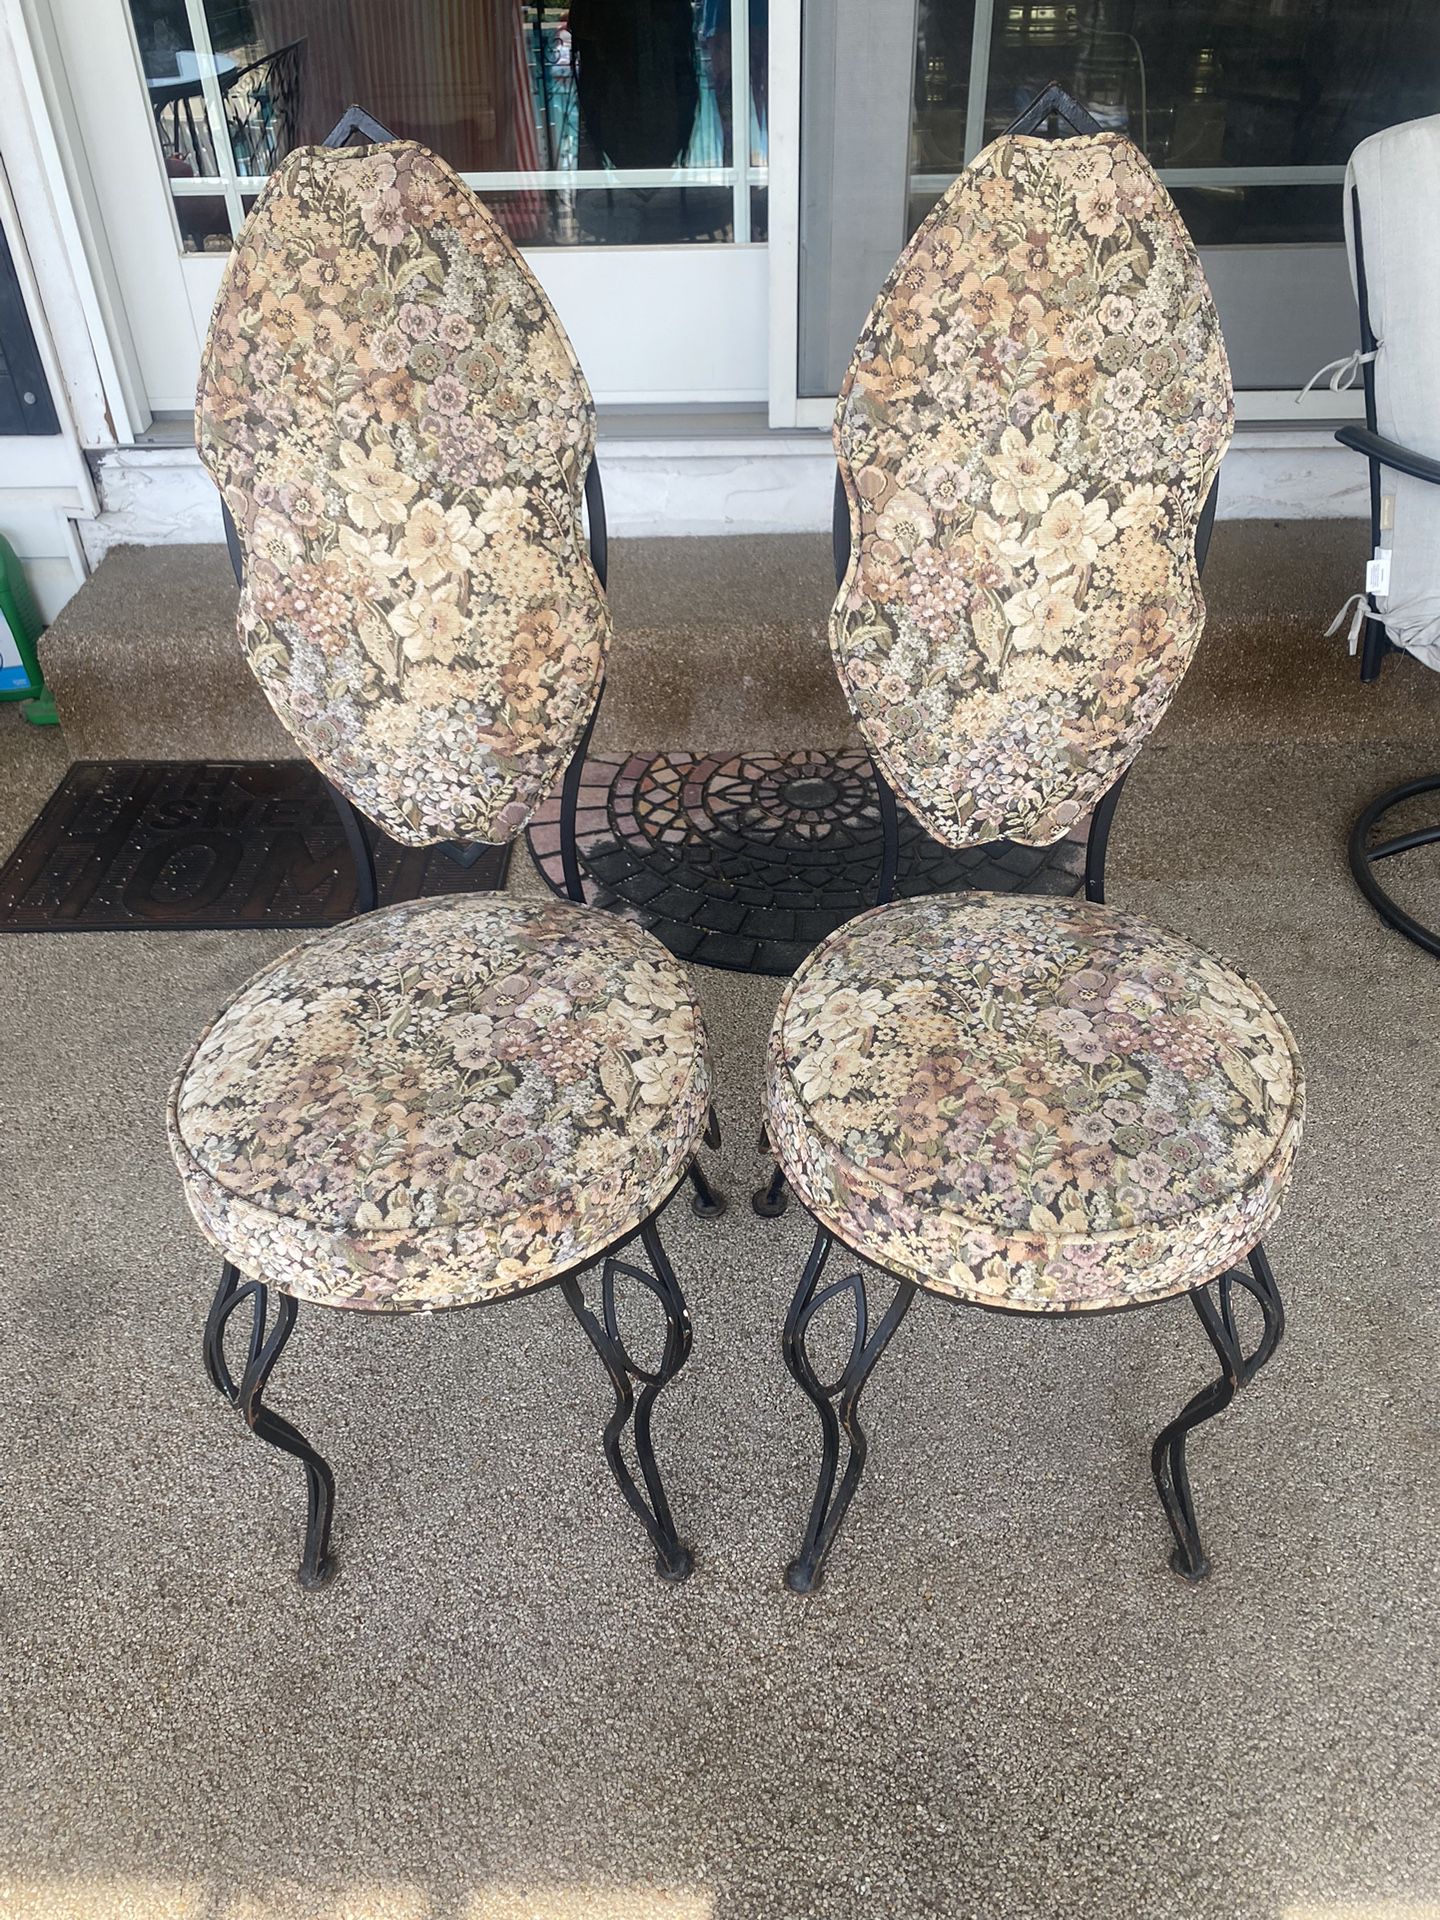 2 Wrought Iron Chairs 